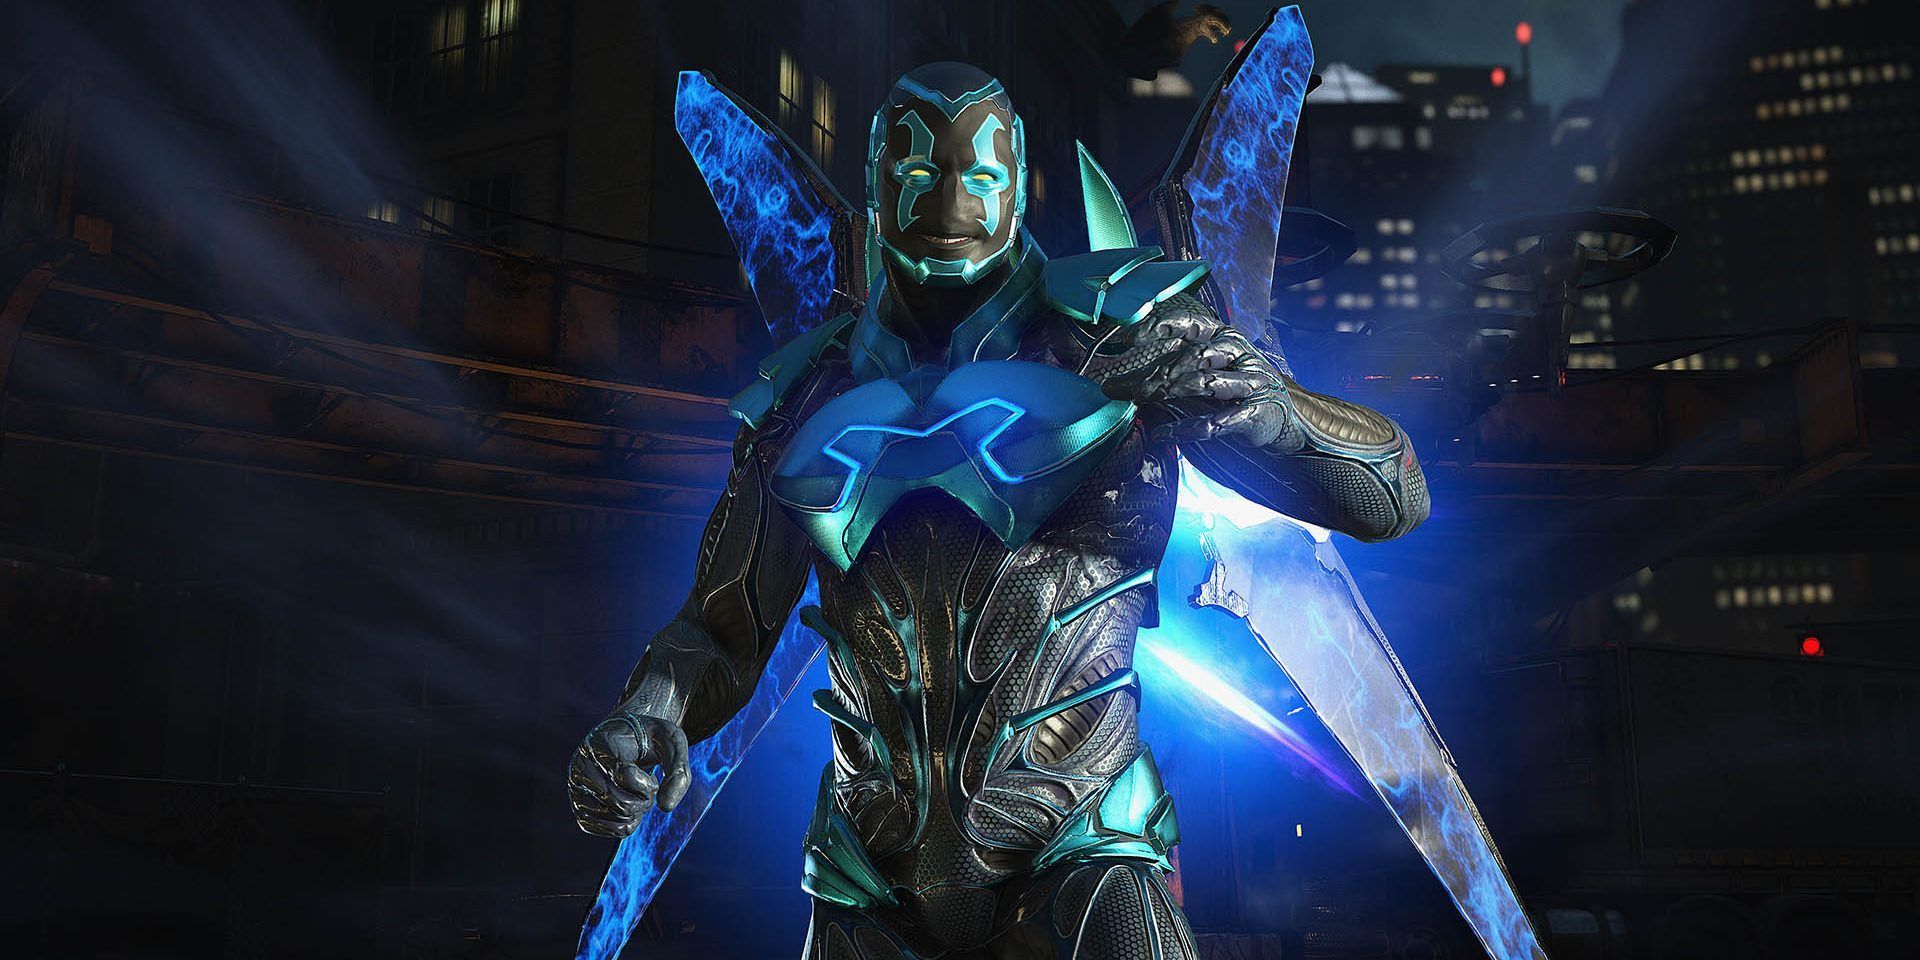 The Blue Beetle as he appears in Injustice 2